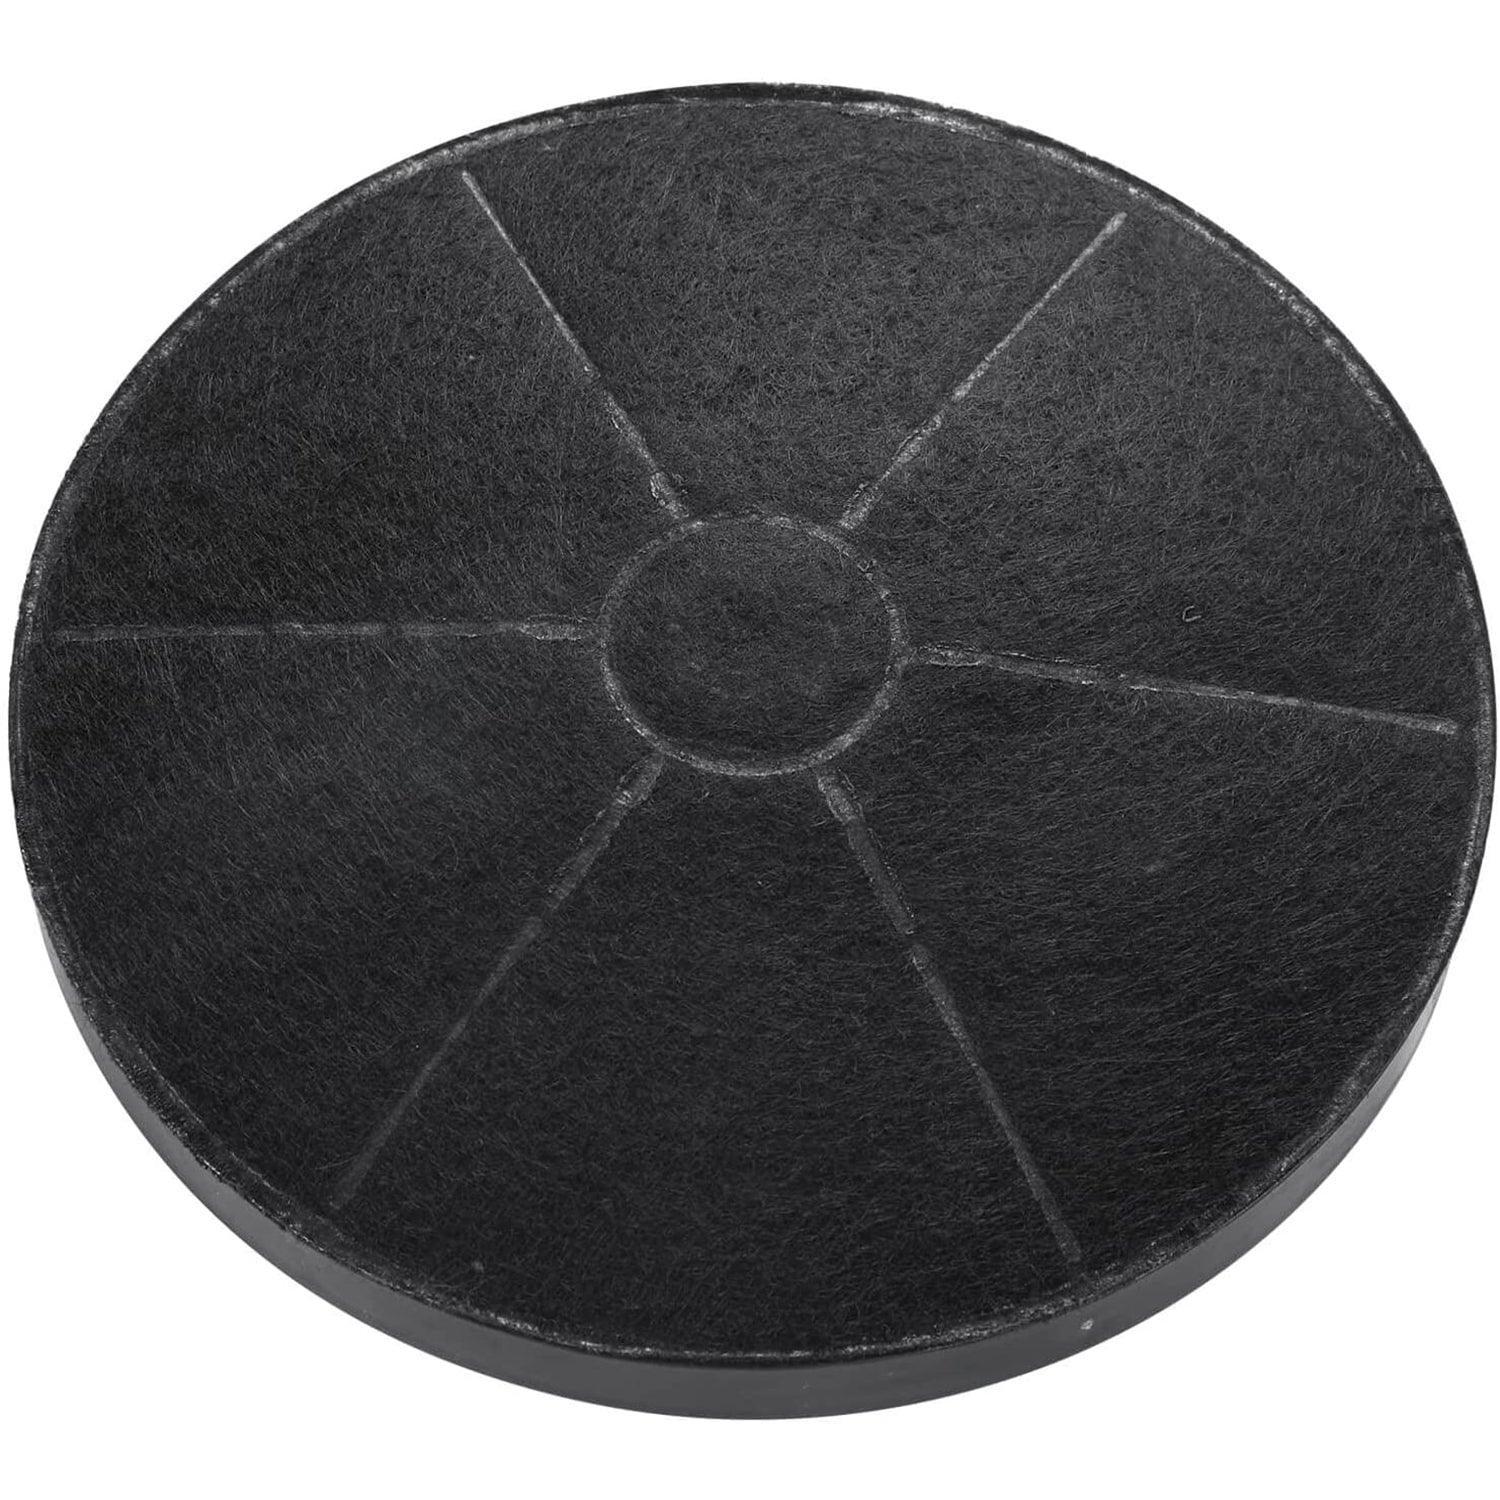 Carbon Filter for Under Cabinet Range Hood US0475BPB and US0475B, Replacement Charcoal Vent Filter for Ductless Use